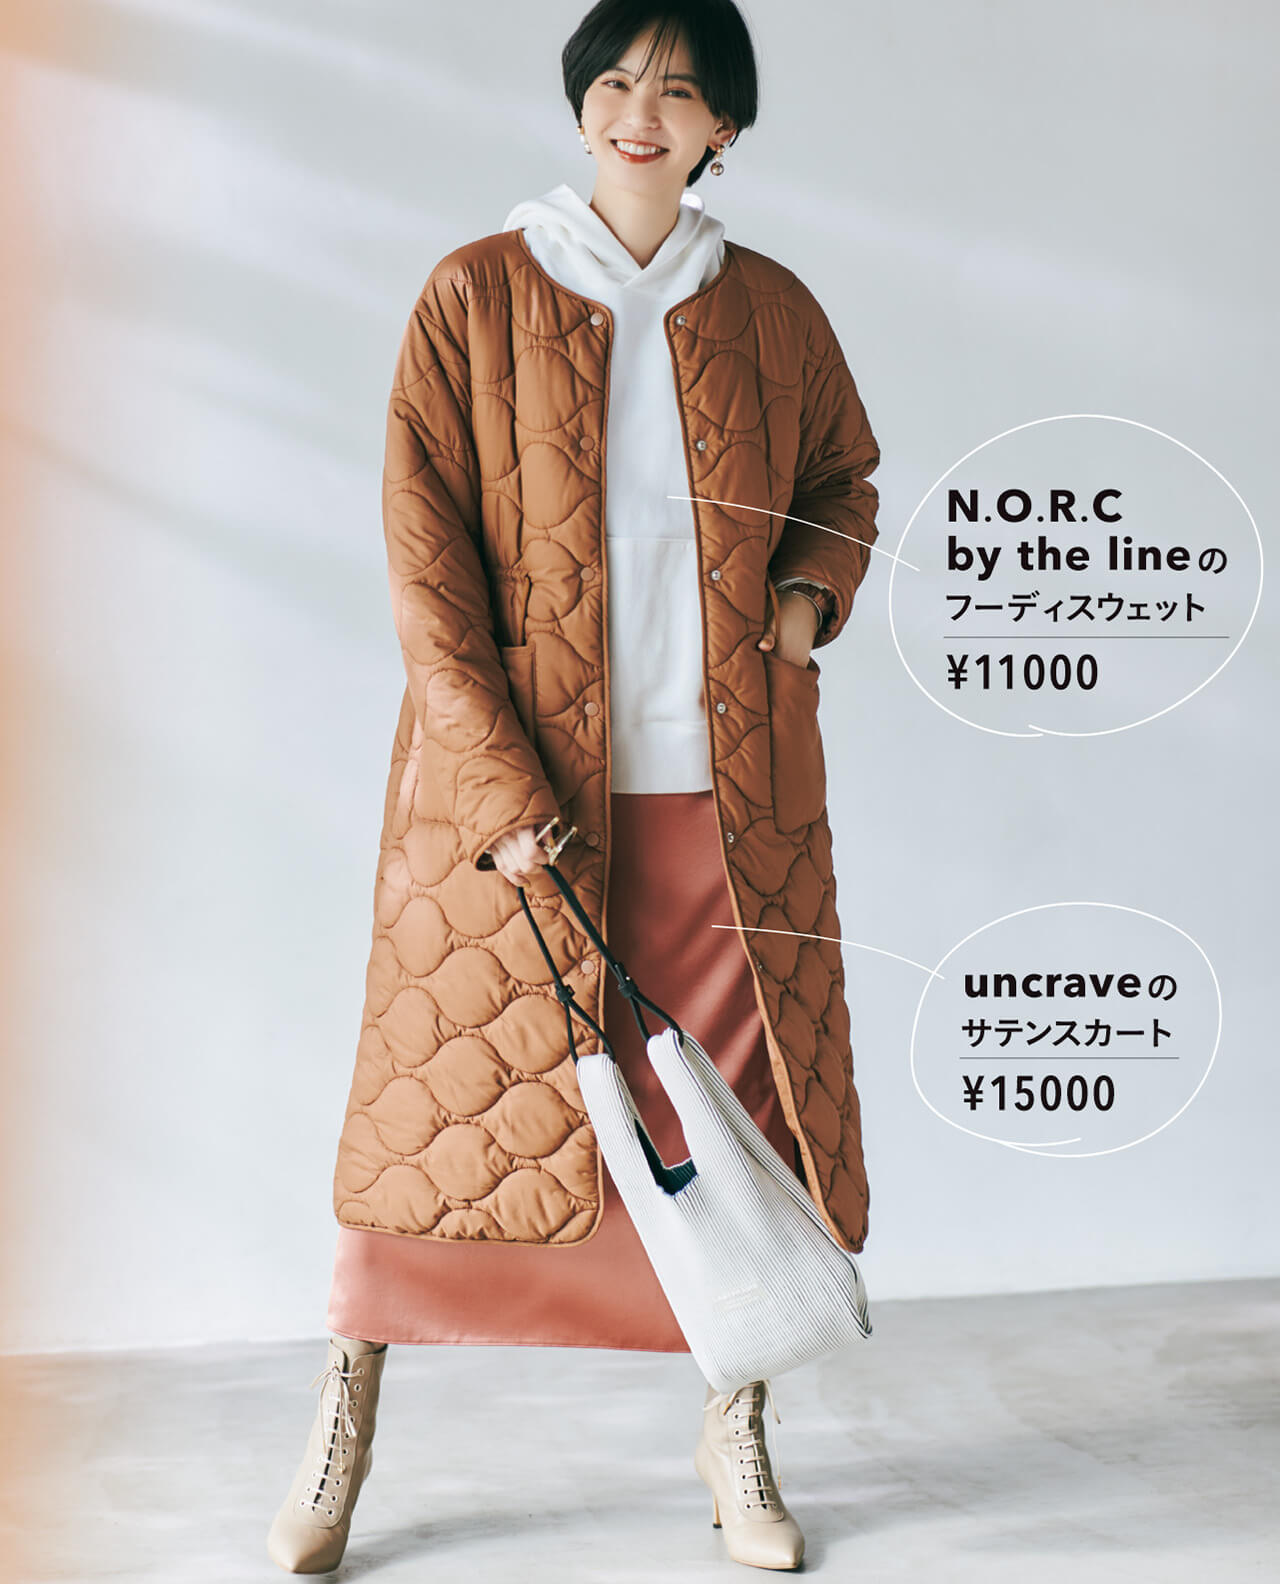 N.O.R.C by the lineのフーディスウェット ¥11000　uncraveのサテンスカート ¥15000